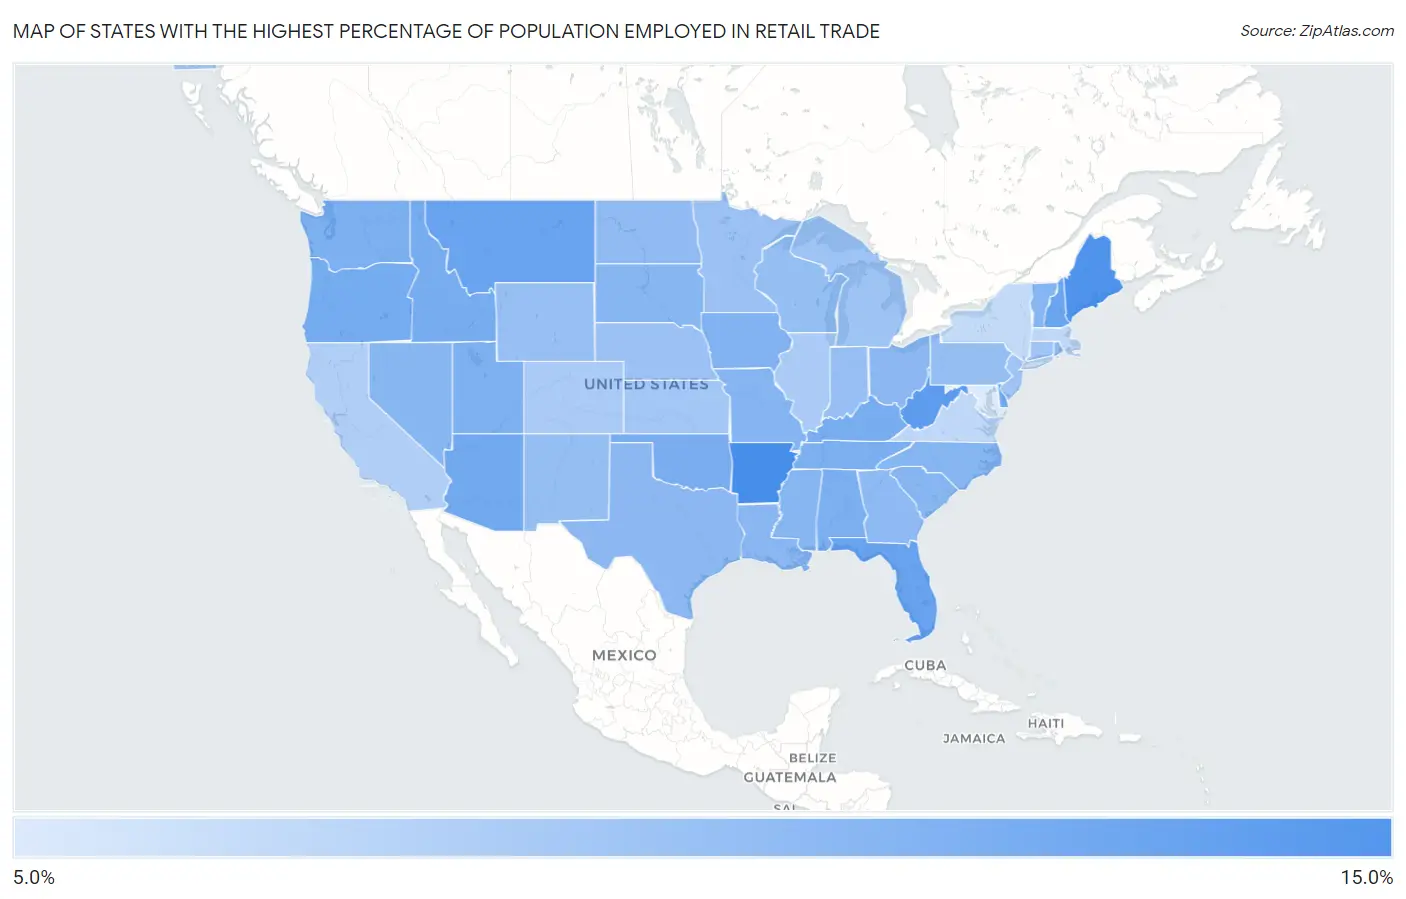 States with the Highest Percentage of Population Employed in Retail Trade in the United States Map